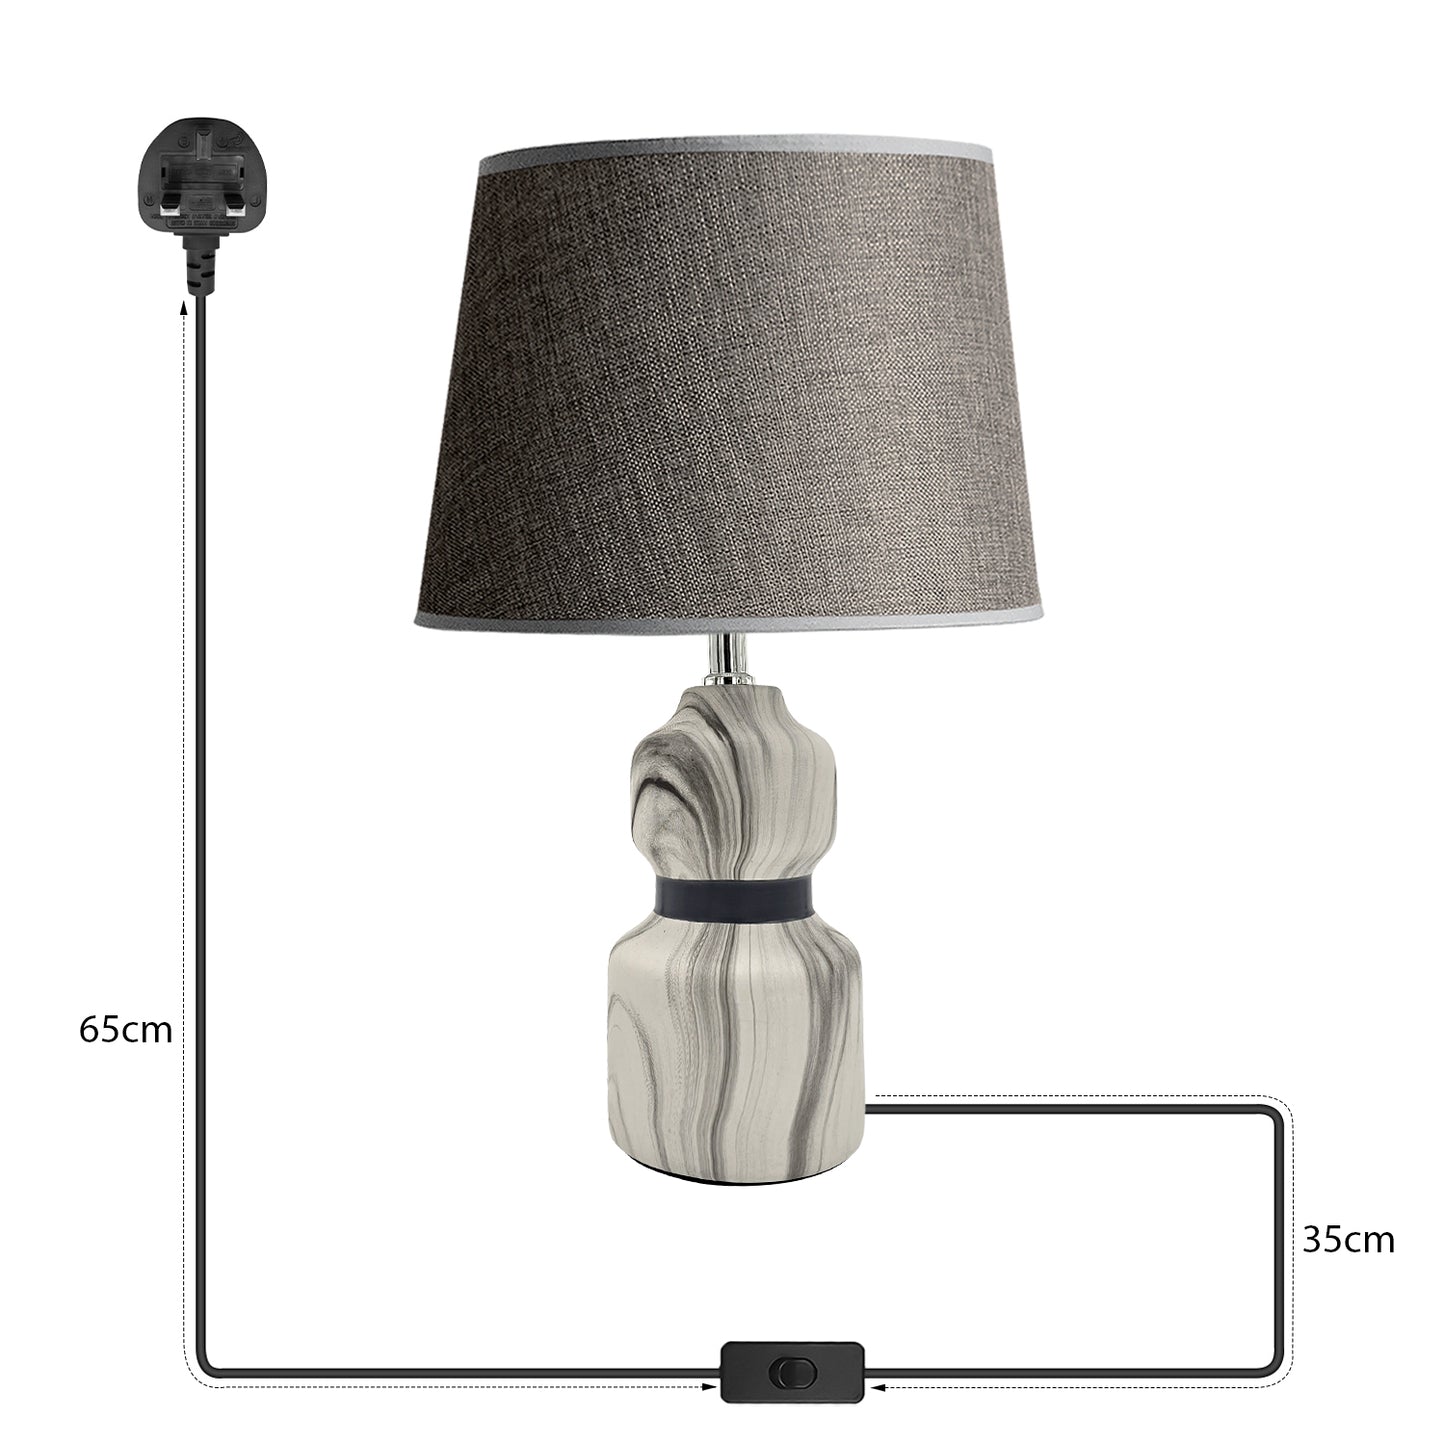 Modern Ceramic Grey Table Lamp Ideal for Bedside and Desk Use - Size Image